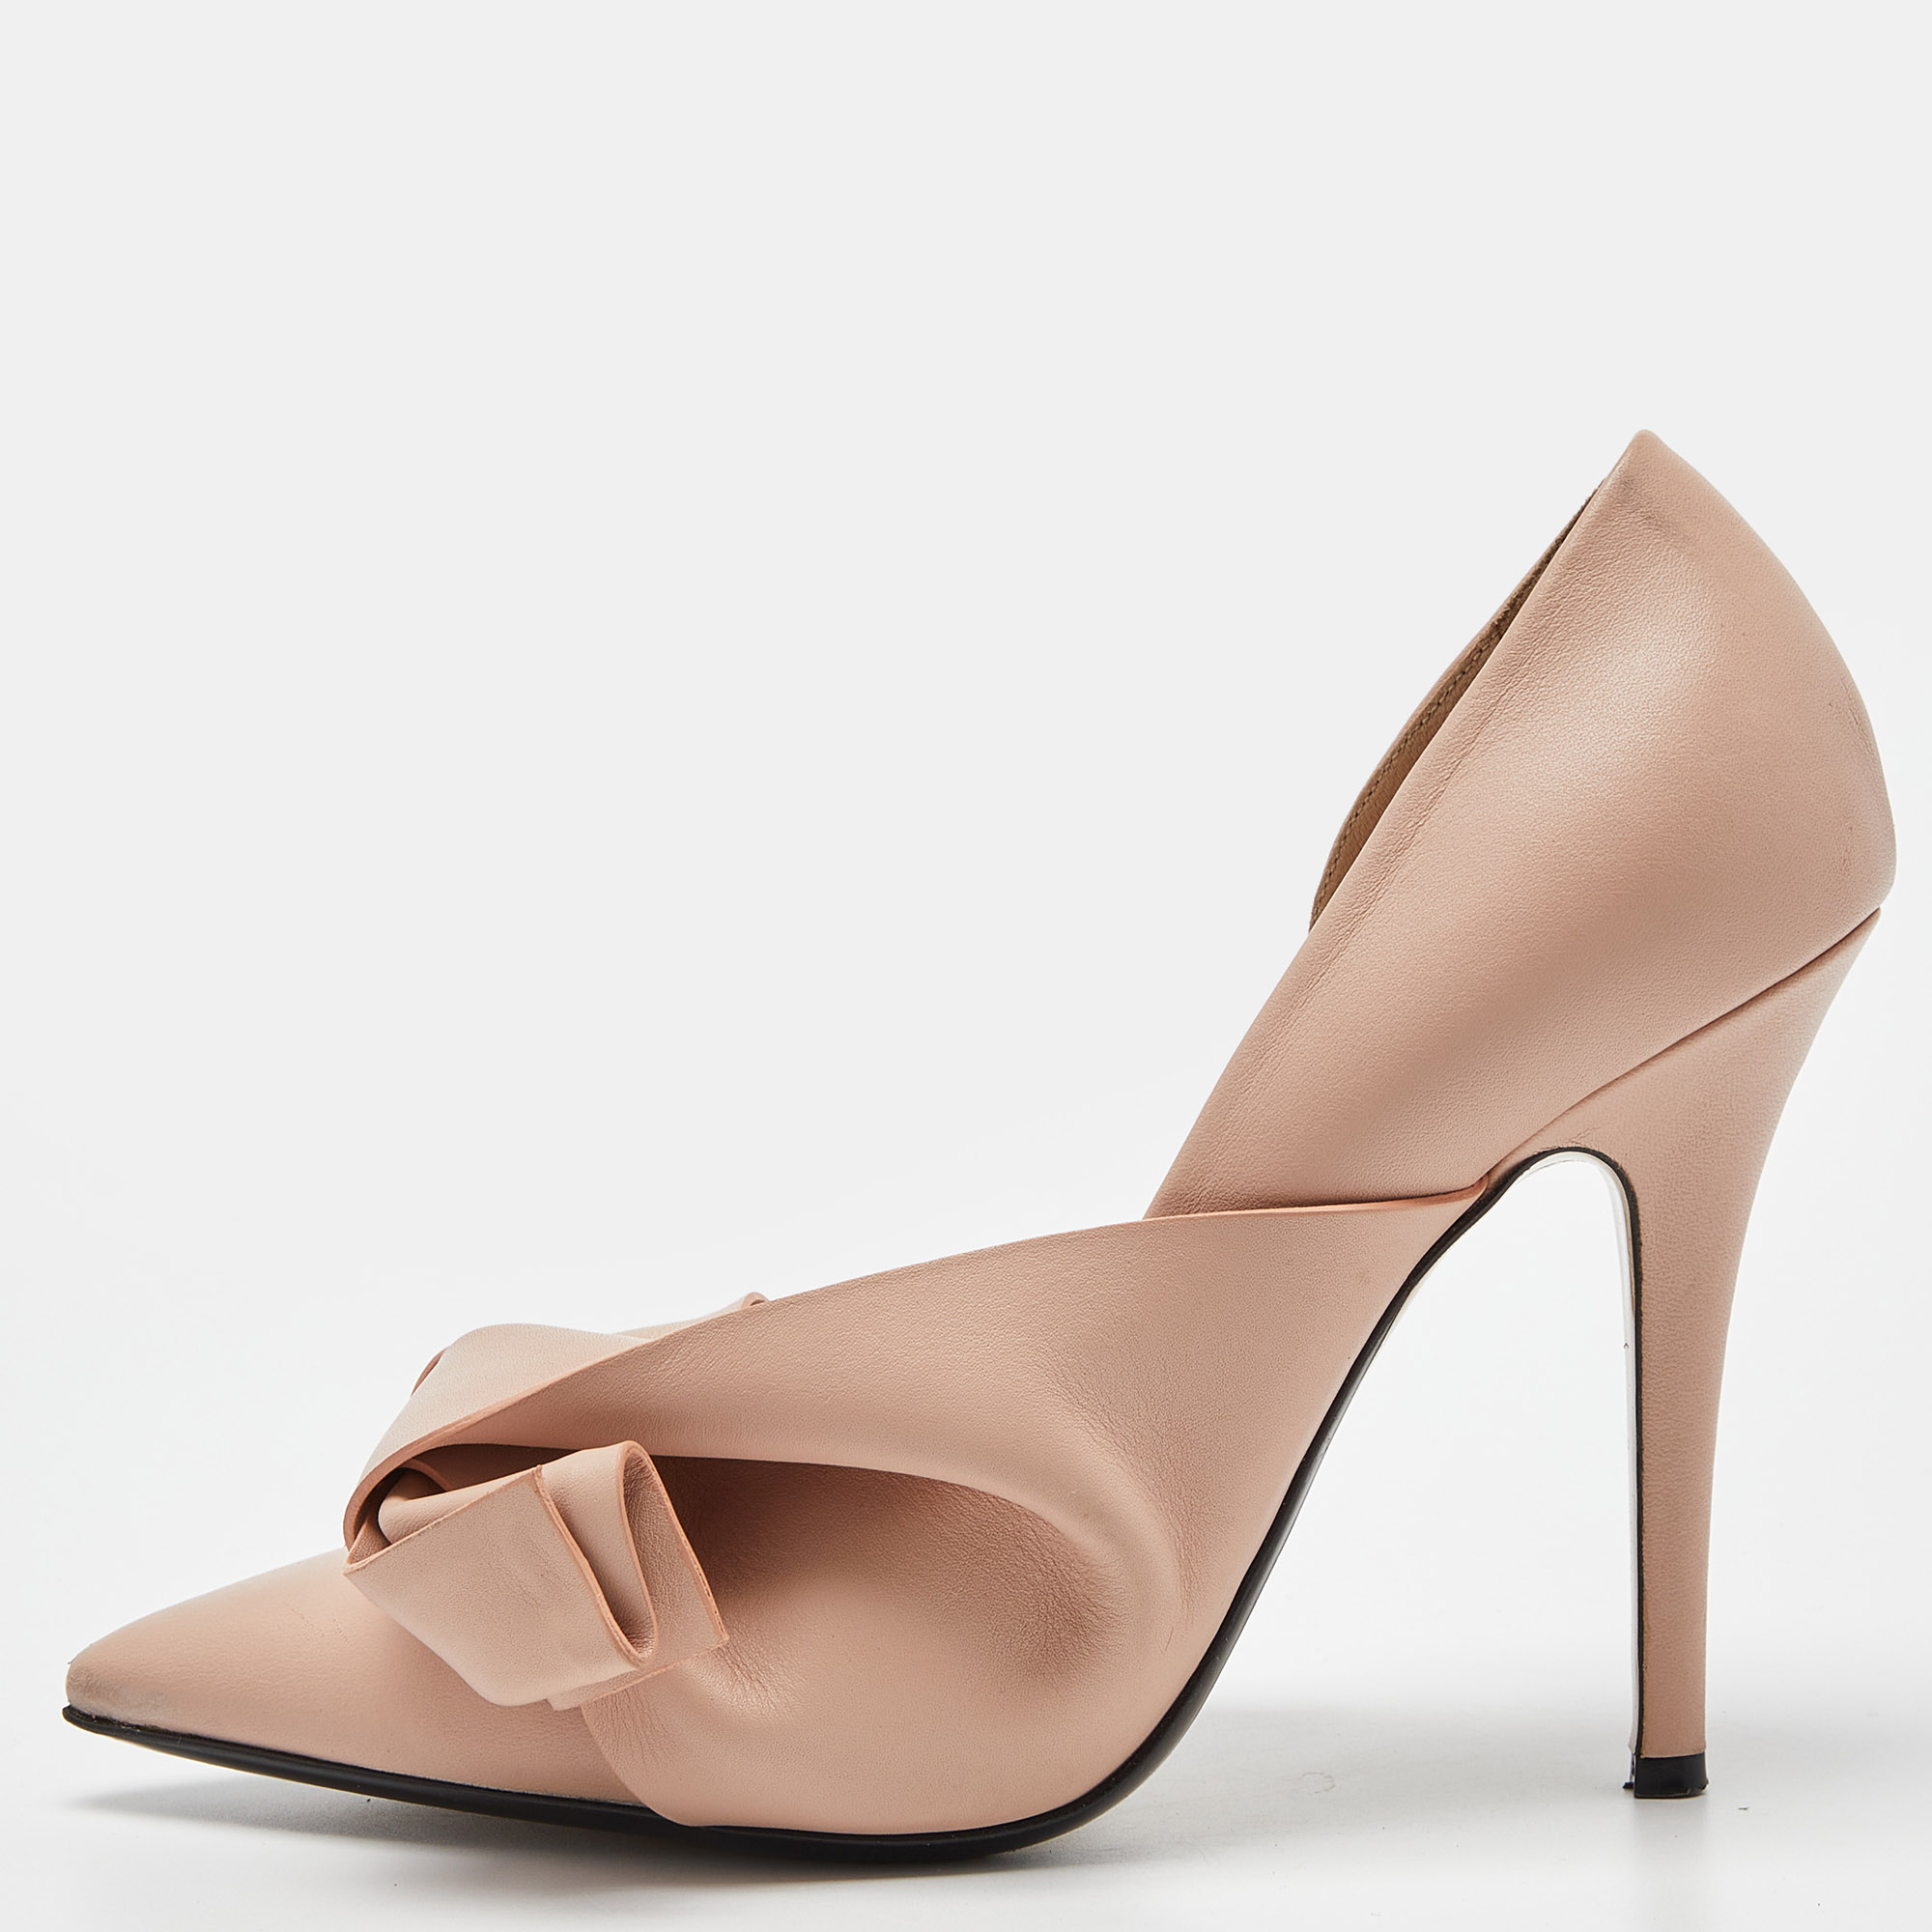 N°21 Light Pink Leather Knot D'Orsay Pumps Size 39.5